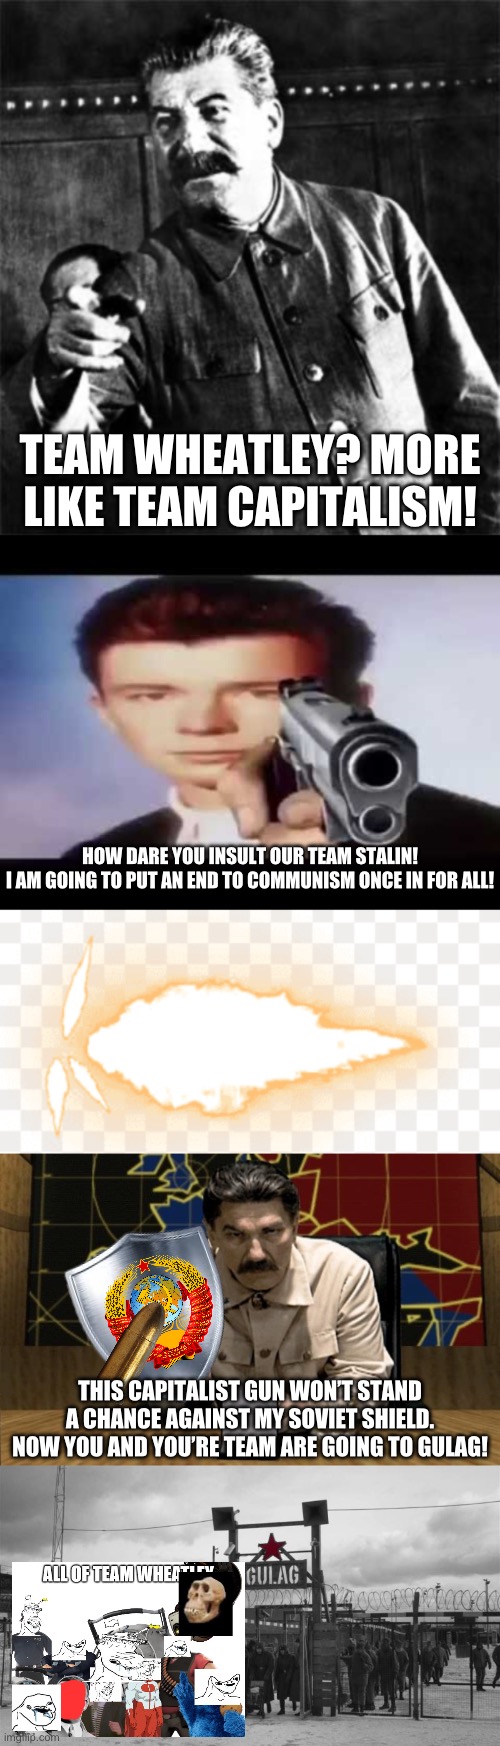 TEAM WHEATLEY? MORE LIKE TEAM CAPITALISM! HOW DARE YOU INSULT OUR TEAM STALIN!
I AM GOING TO PUT AN END TO COMMUNISM ONCE IN FOR ALL! THIS CAPITALIST GUN WON’T STAND A CHANCE AGAINST MY SOVIET SHIELD. NOW YOU AND YOU’RE TEAM ARE GOING TO GULAG! | image tagged in stalin,rick astley pointing at you,gunshot,red alert stalin,gulag | made w/ Imgflip meme maker